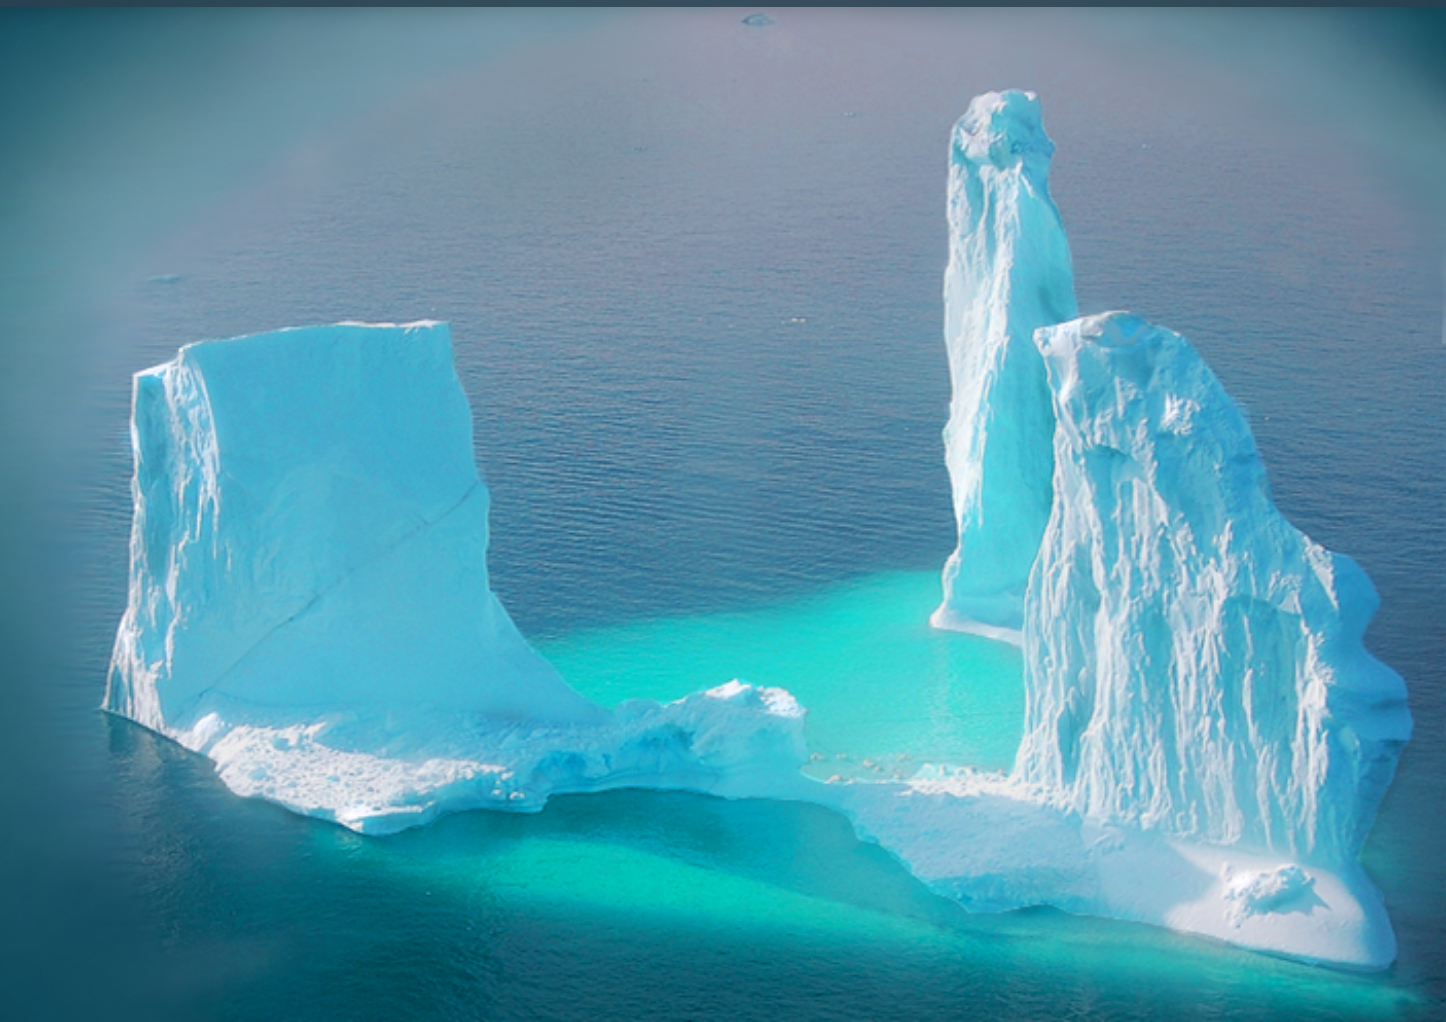 Two icebergs tower above a blue ocean.